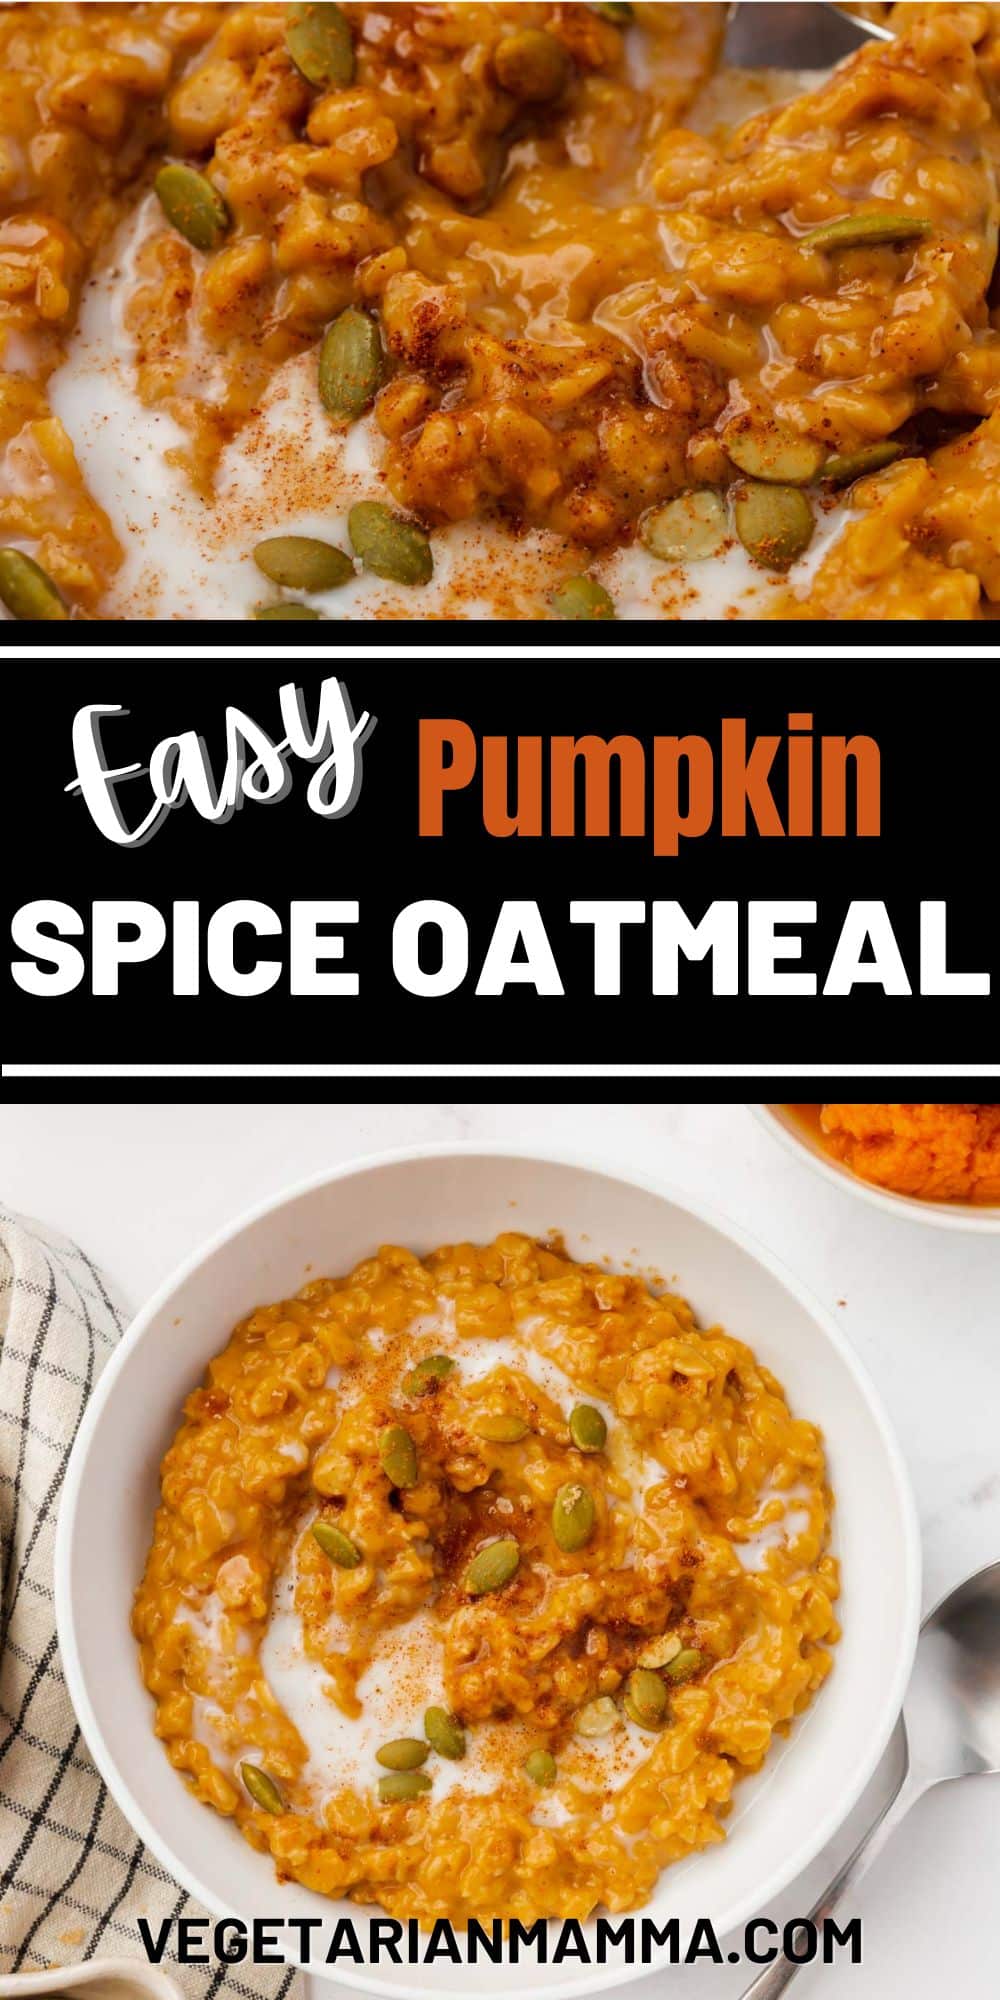 Enjoy a hearty pumpkin-spiced breakfast, cooked in under 10 minutes, using this easy recipe for Pumpkin Spice Oatmeal with real pumpkin and delicious flavors.